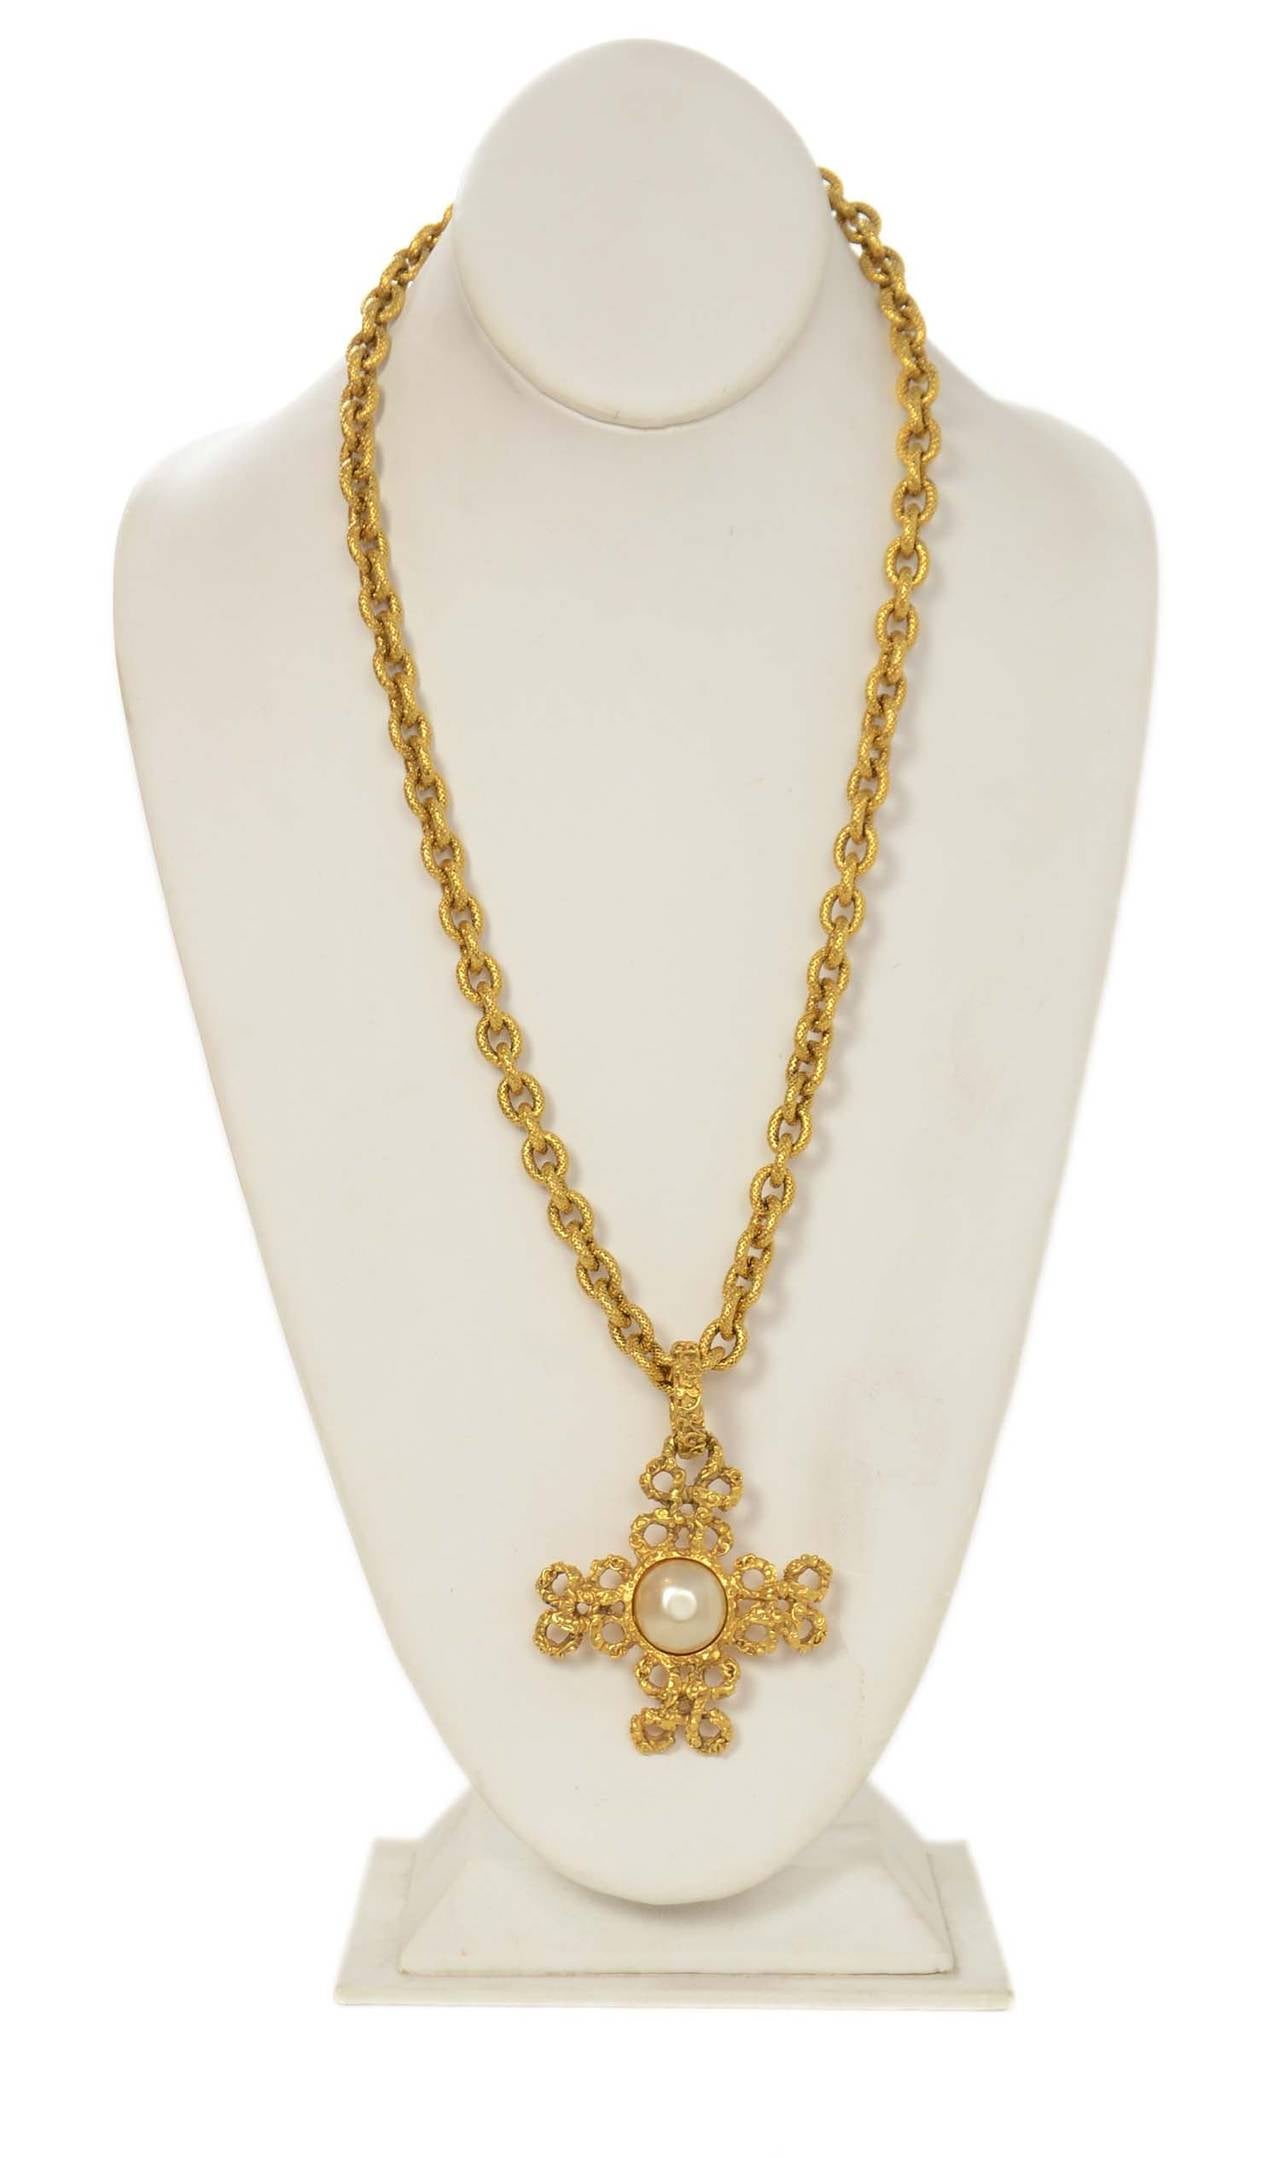 Chanel '03 Gold Chain Necklace w/Gold & Pearl Pendant
Chain features intricate diamond print detailing

    Made in: France
    Year of Production: 2003
    Stamp: 03 CC A
    Closure: Jump ring closure
    Color: Gold and ivory
   